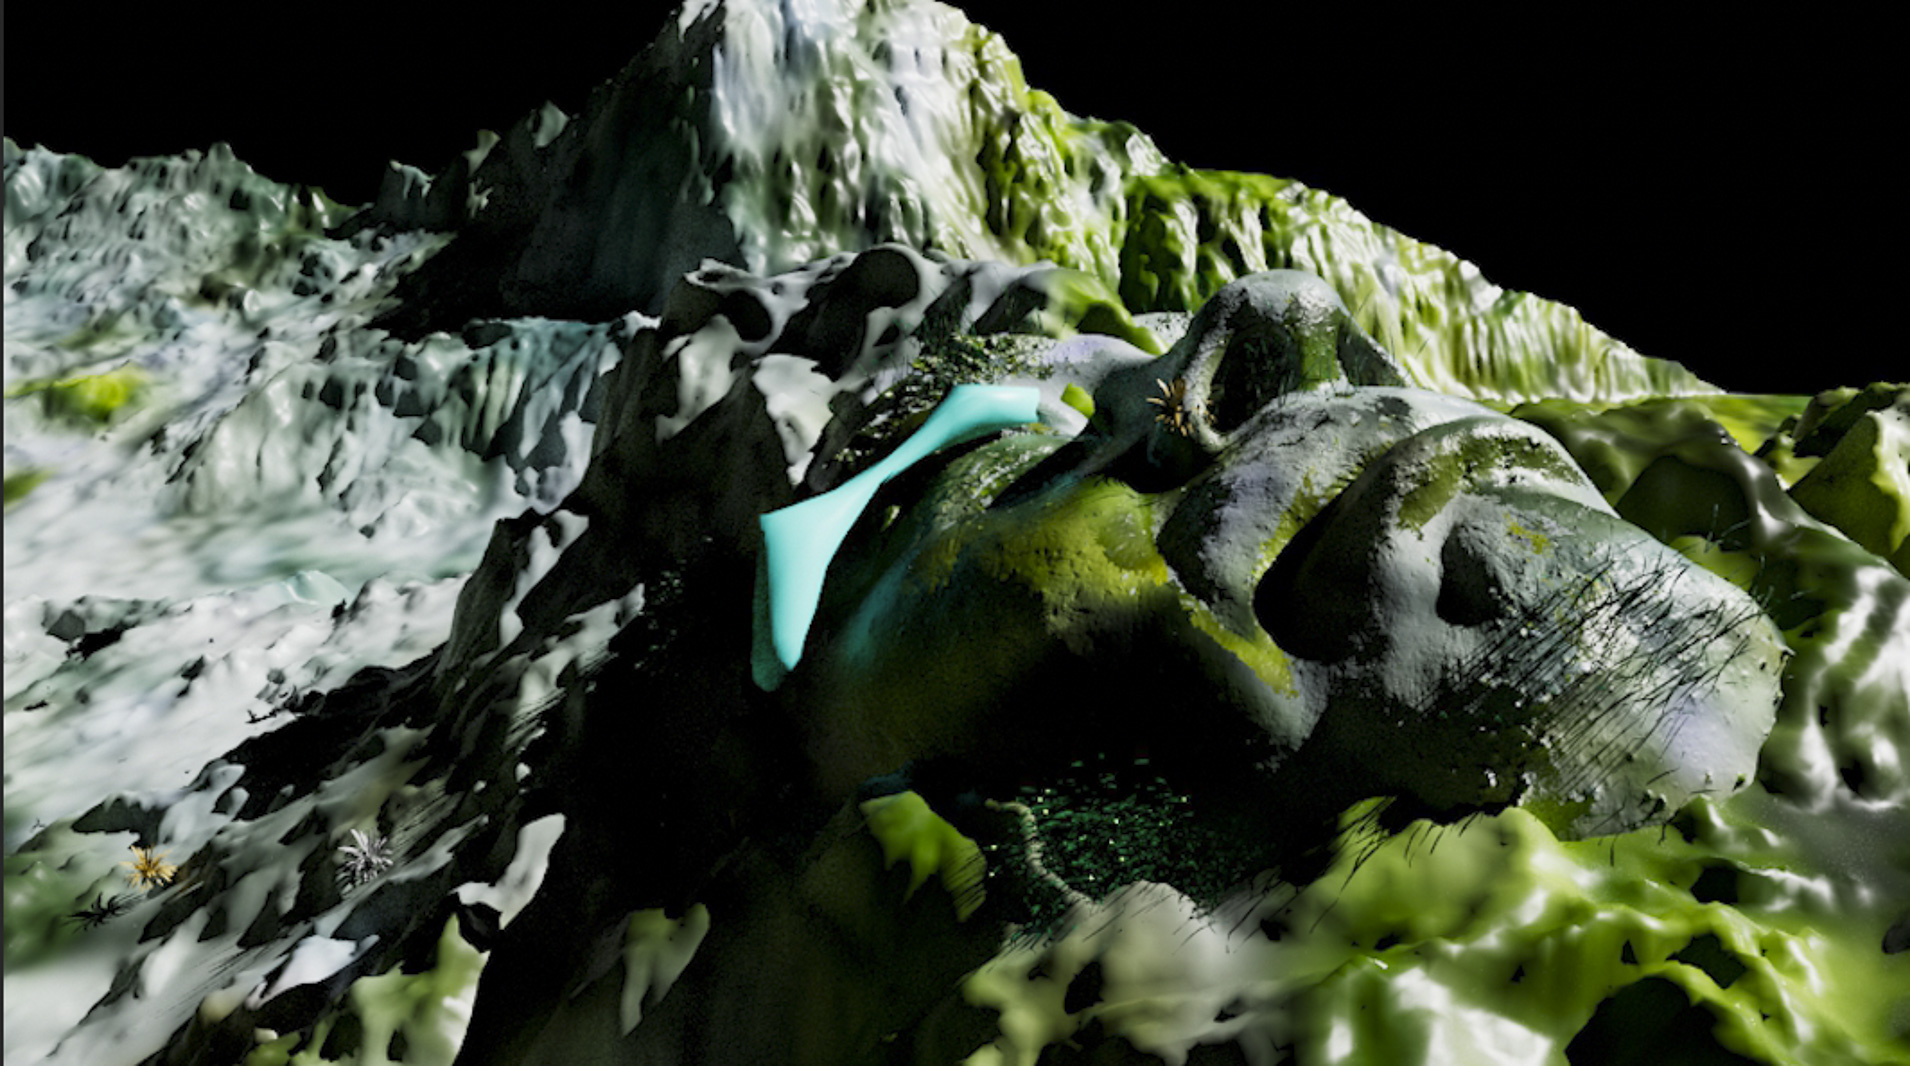 Still from a digital animation showing an abstracted landscape